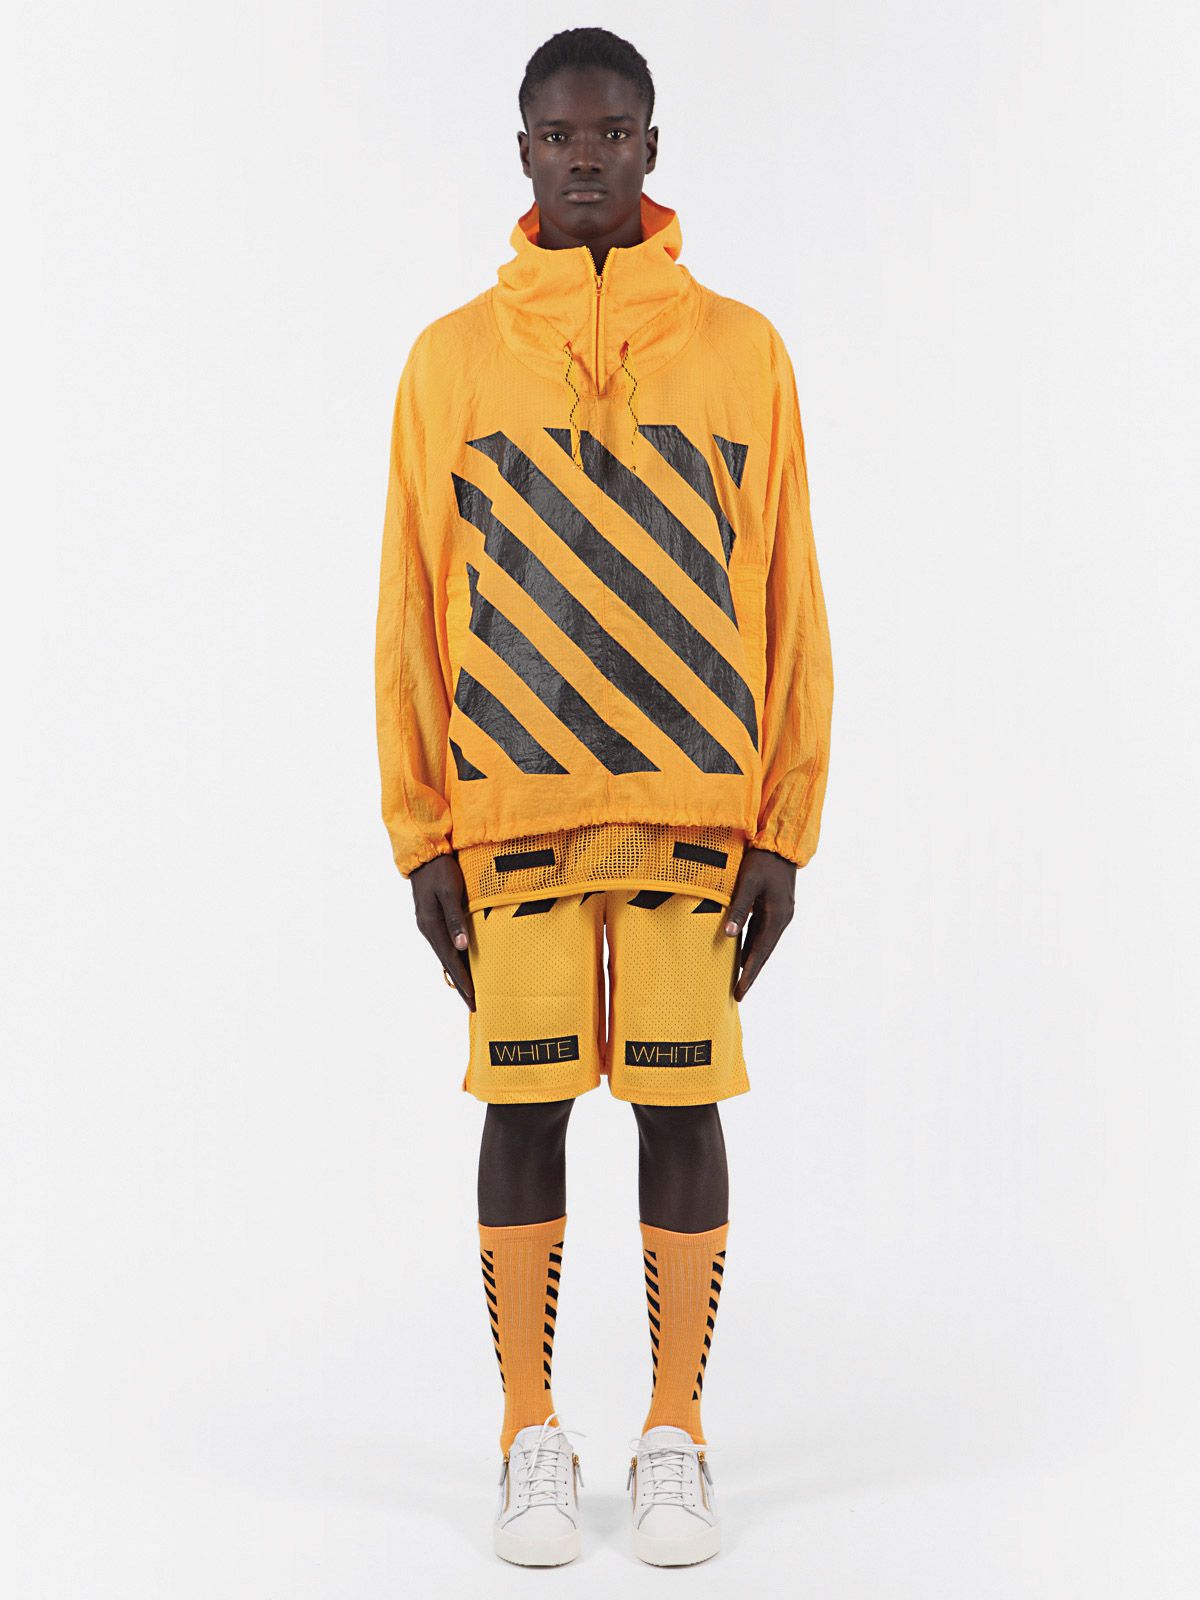 abloh first collection